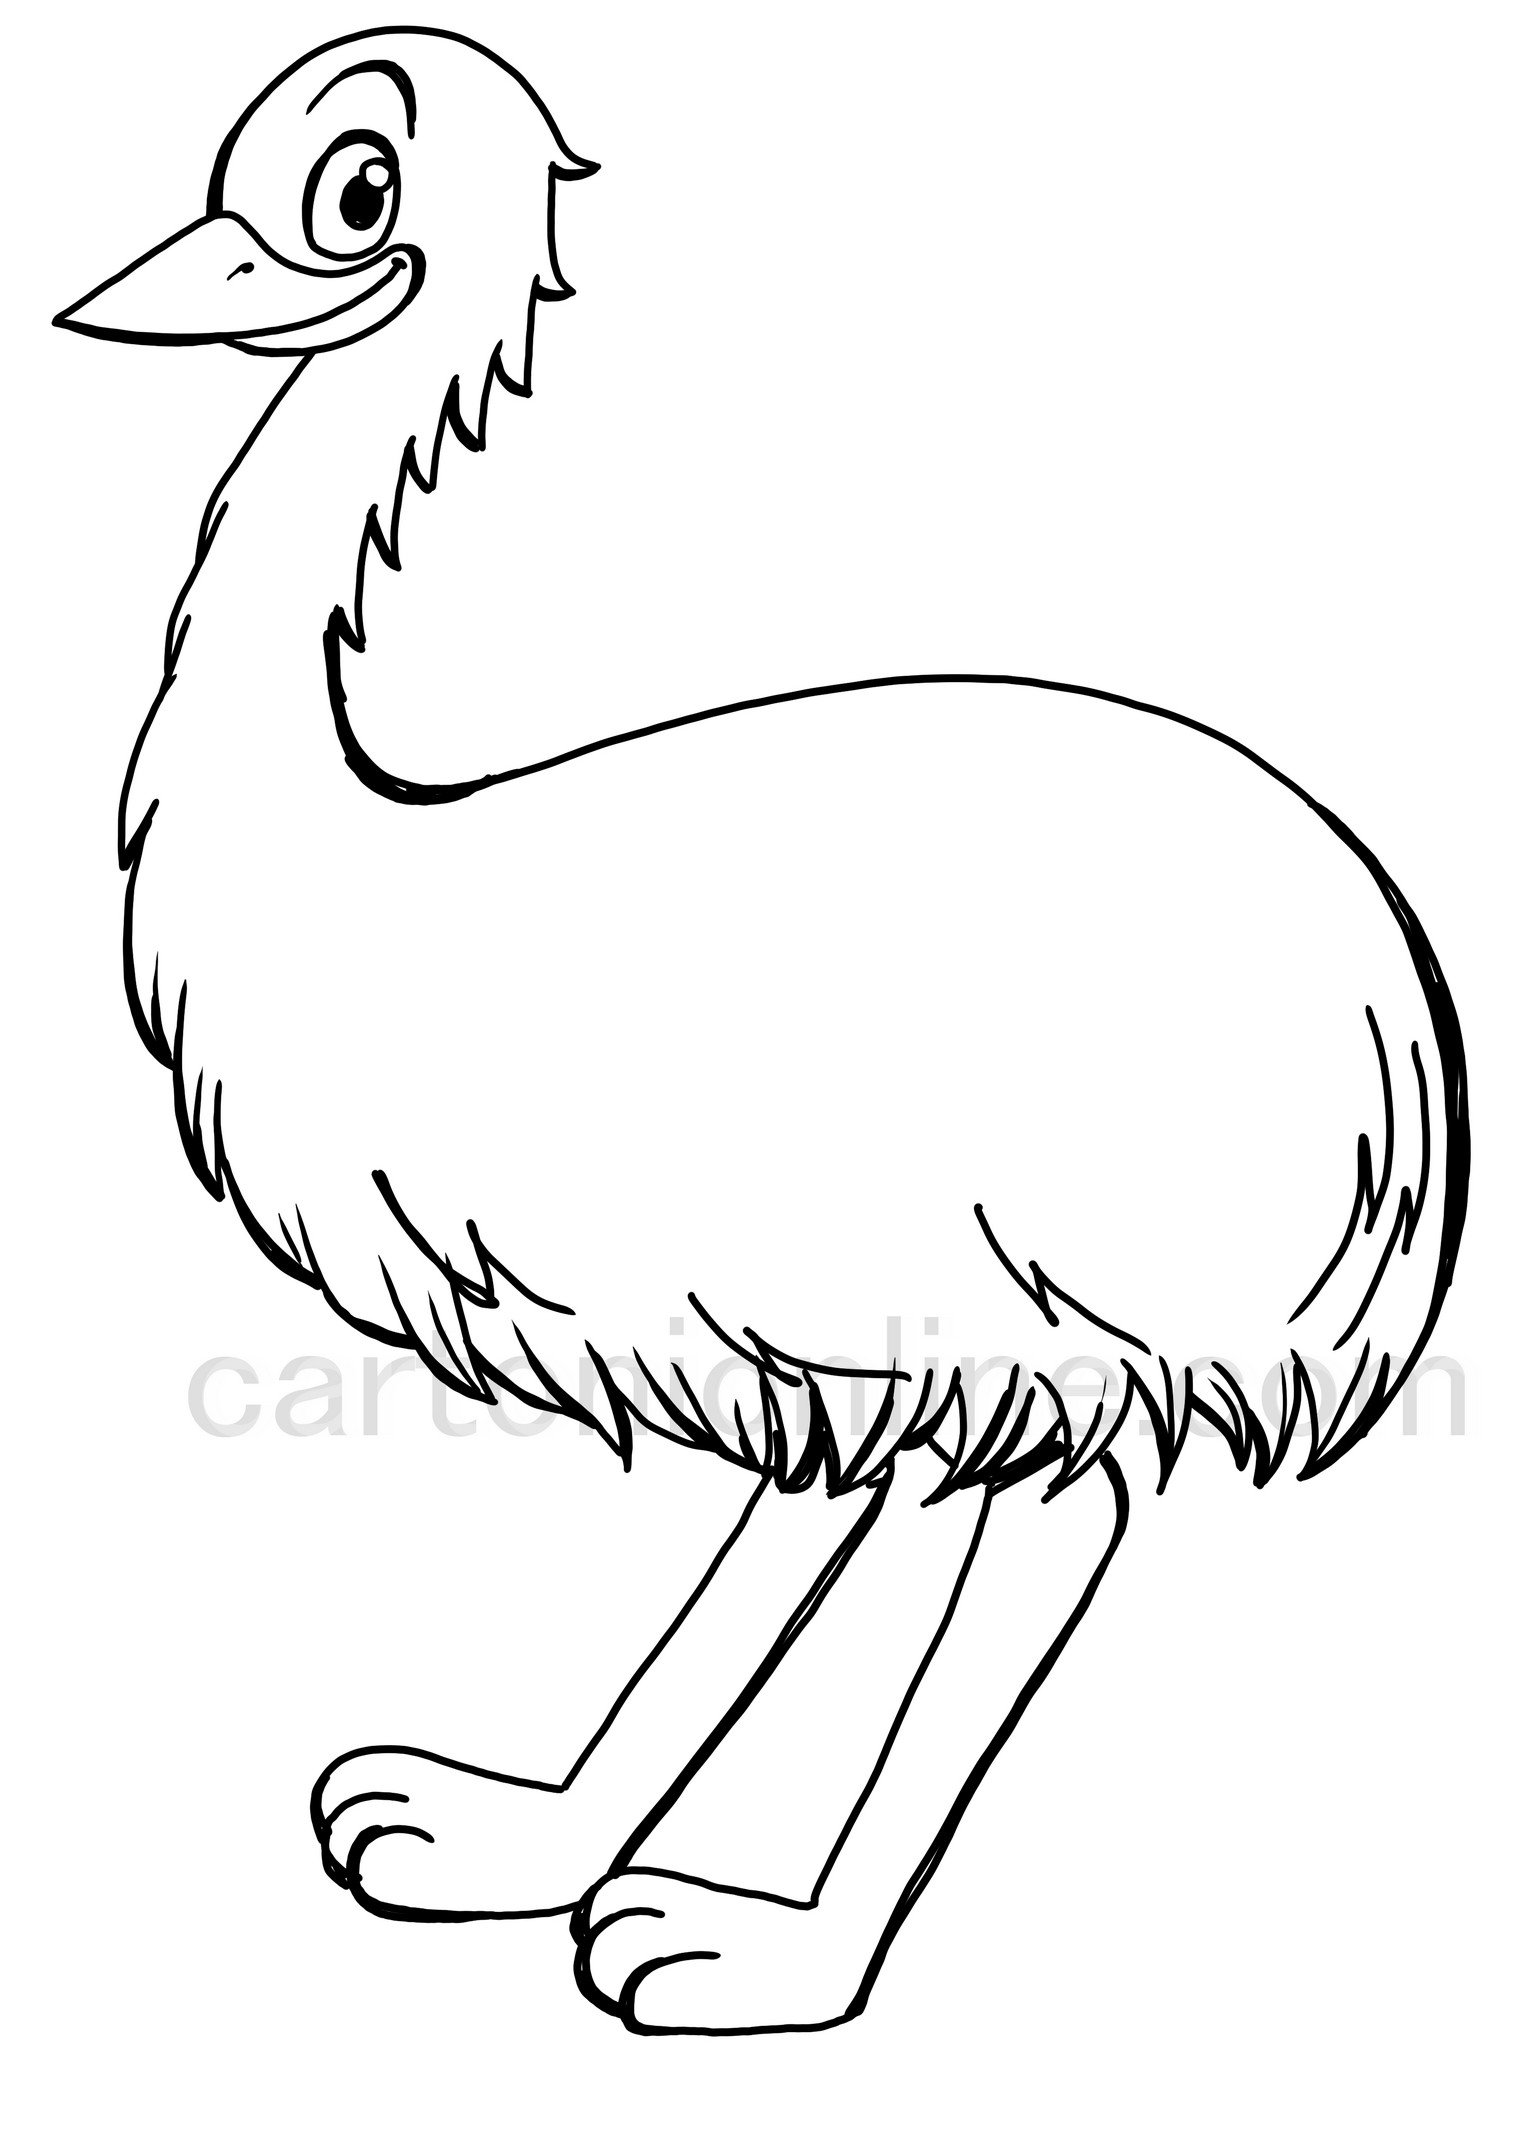 Cartoon style em coloring page